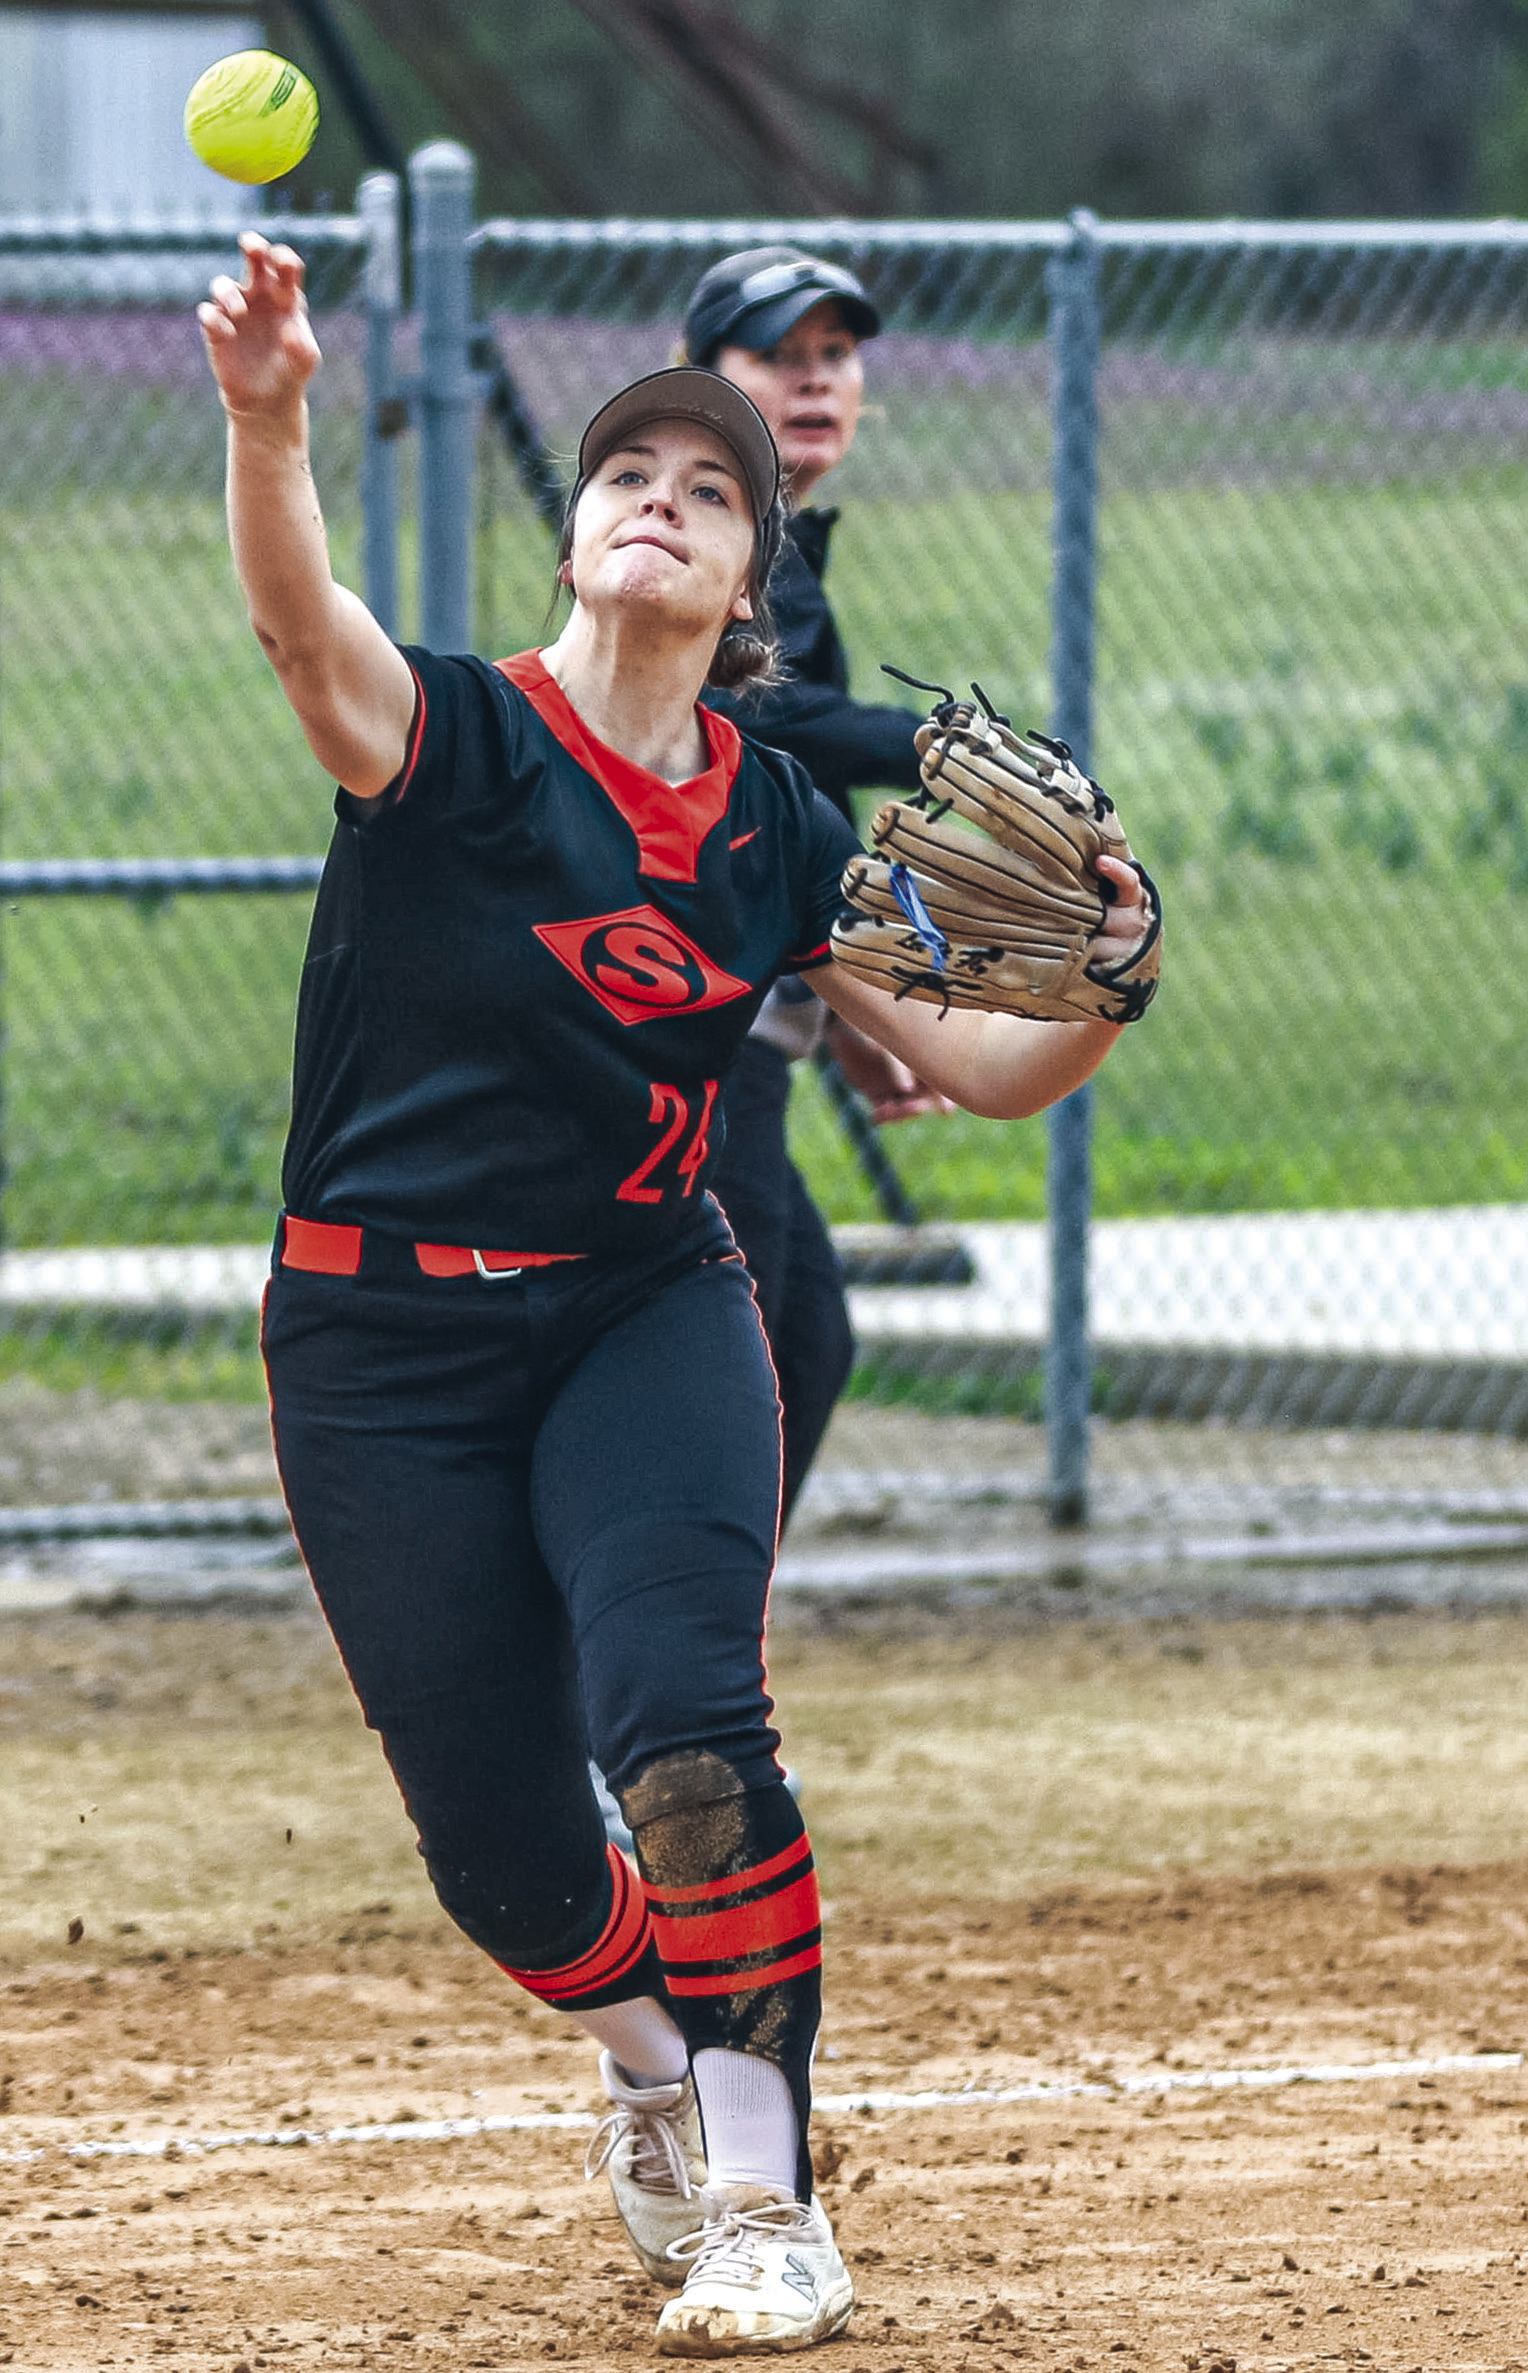 Sallisaw third baseman Emily Gregory makes a throw during the Lady Diamonds’ Webbers Falls/Sallisaw Slowpitch Tournament opener Thursday against Roland at Sallisaw. The Lady Rangers defeated Sallisaw 11-4 in the contest. LEA LESSLEY •TIMES